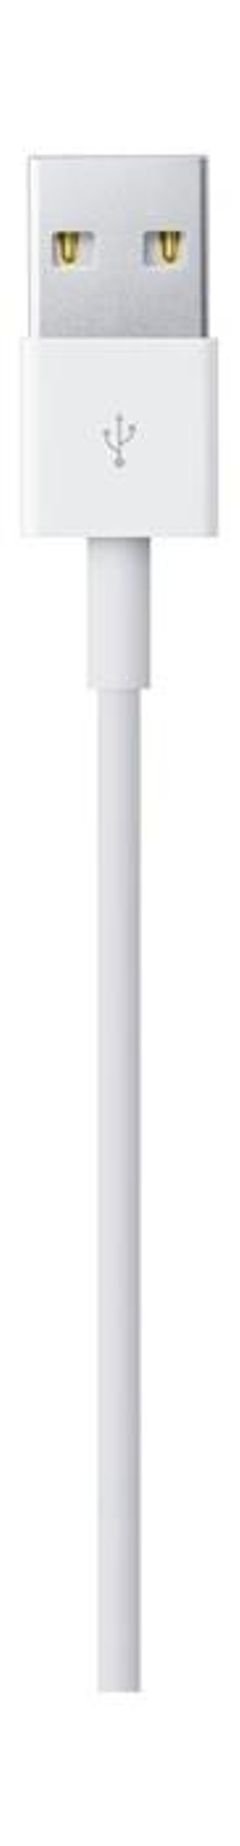 Apple Lightning to USB Cable - 1M - White color - MD818 model